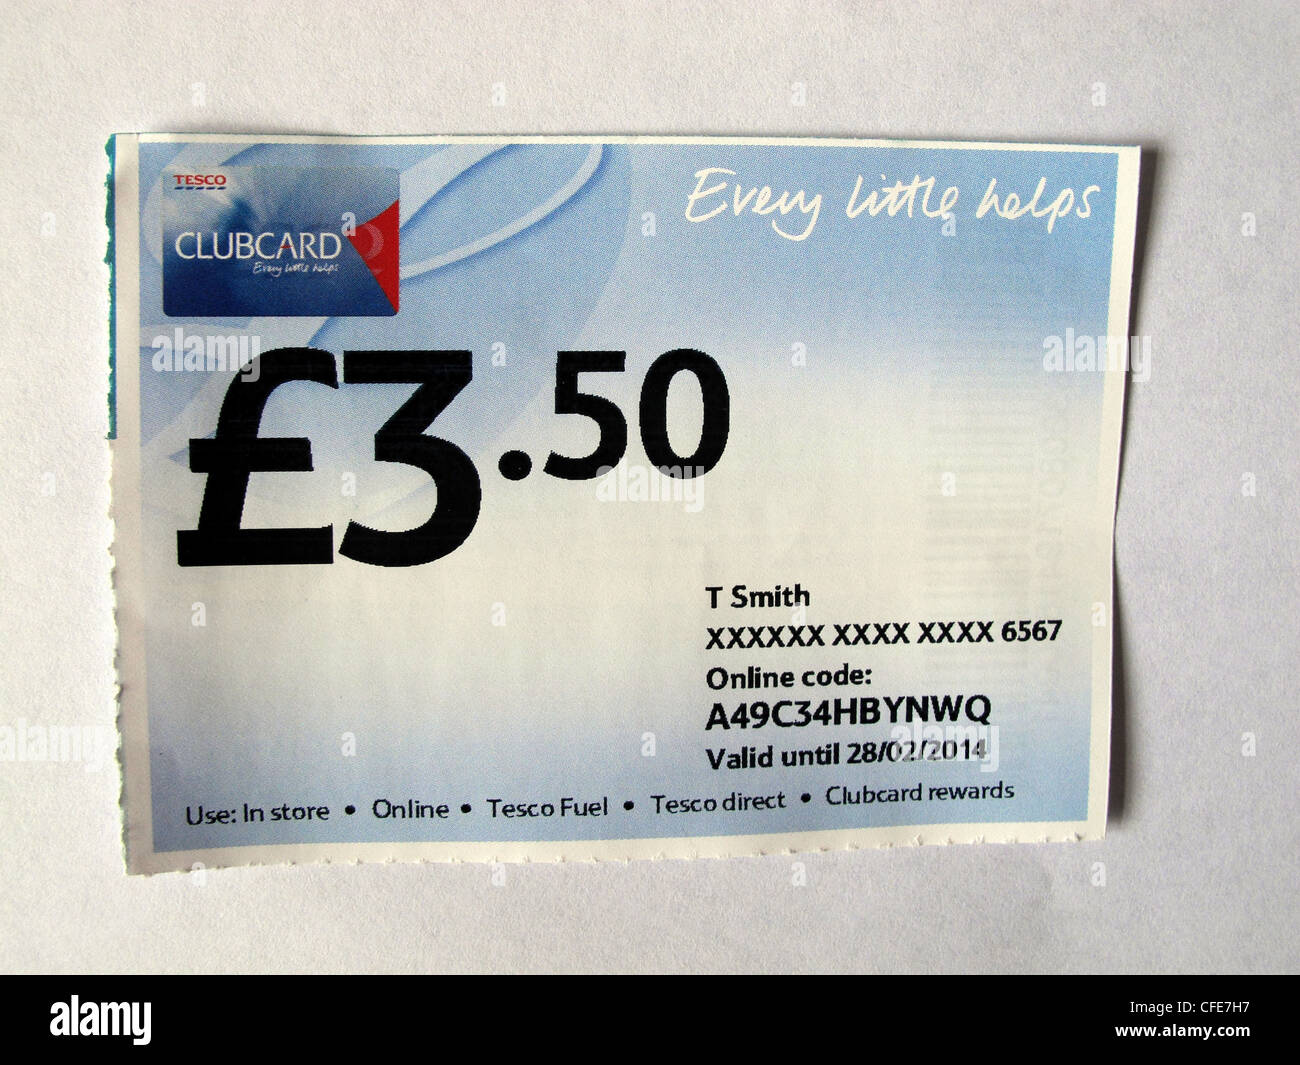 3.50 pound Tesco Clubcard 'Every Little Helps' voucher Stock Photo